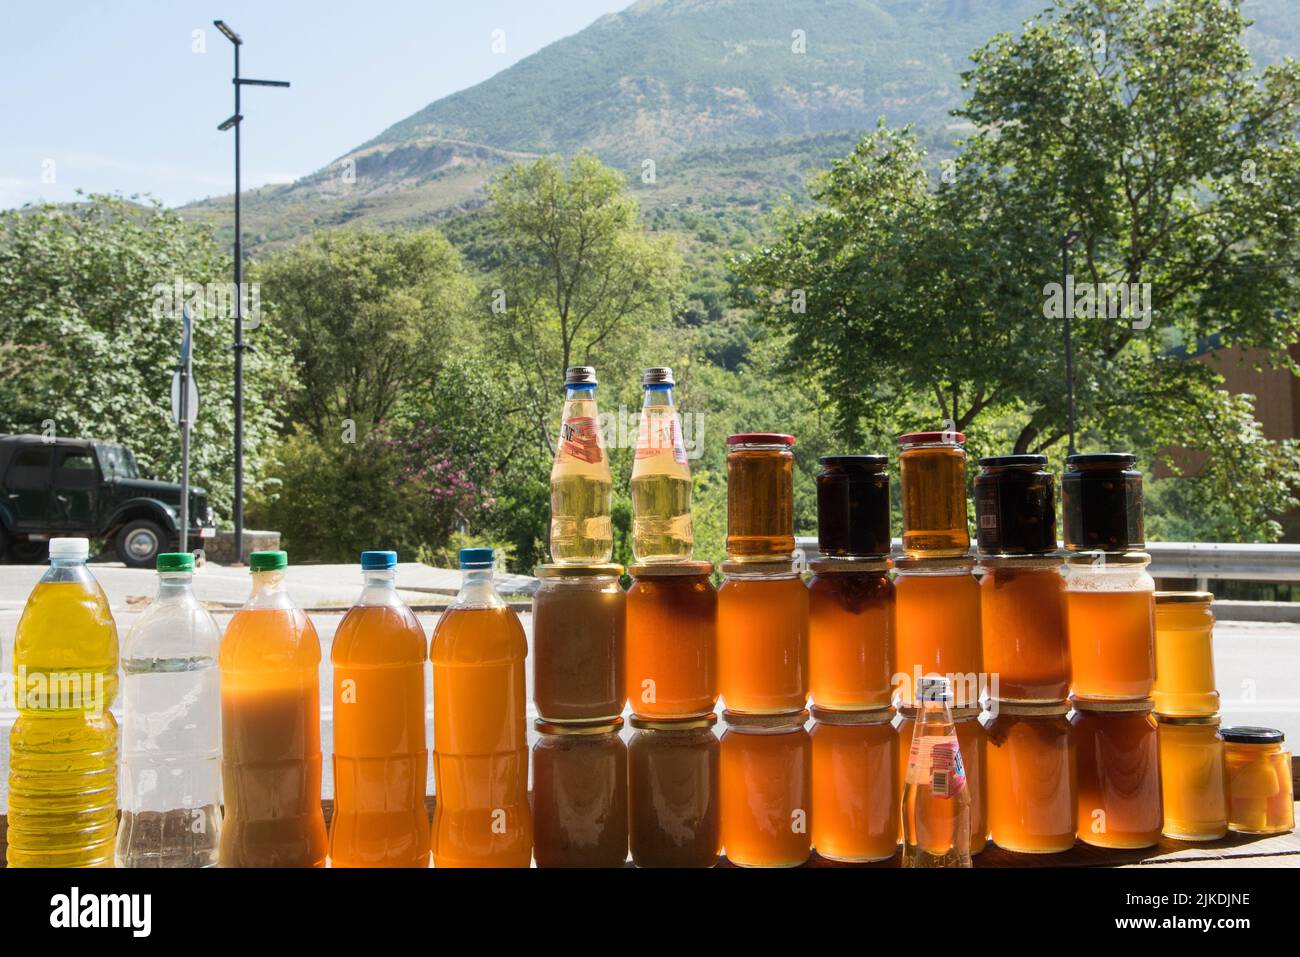 Honey pots for sale at the roadside, between Saranda and Gjirokaster, where local produce is sold,Albania, Southeastern Europe. Stock Photo